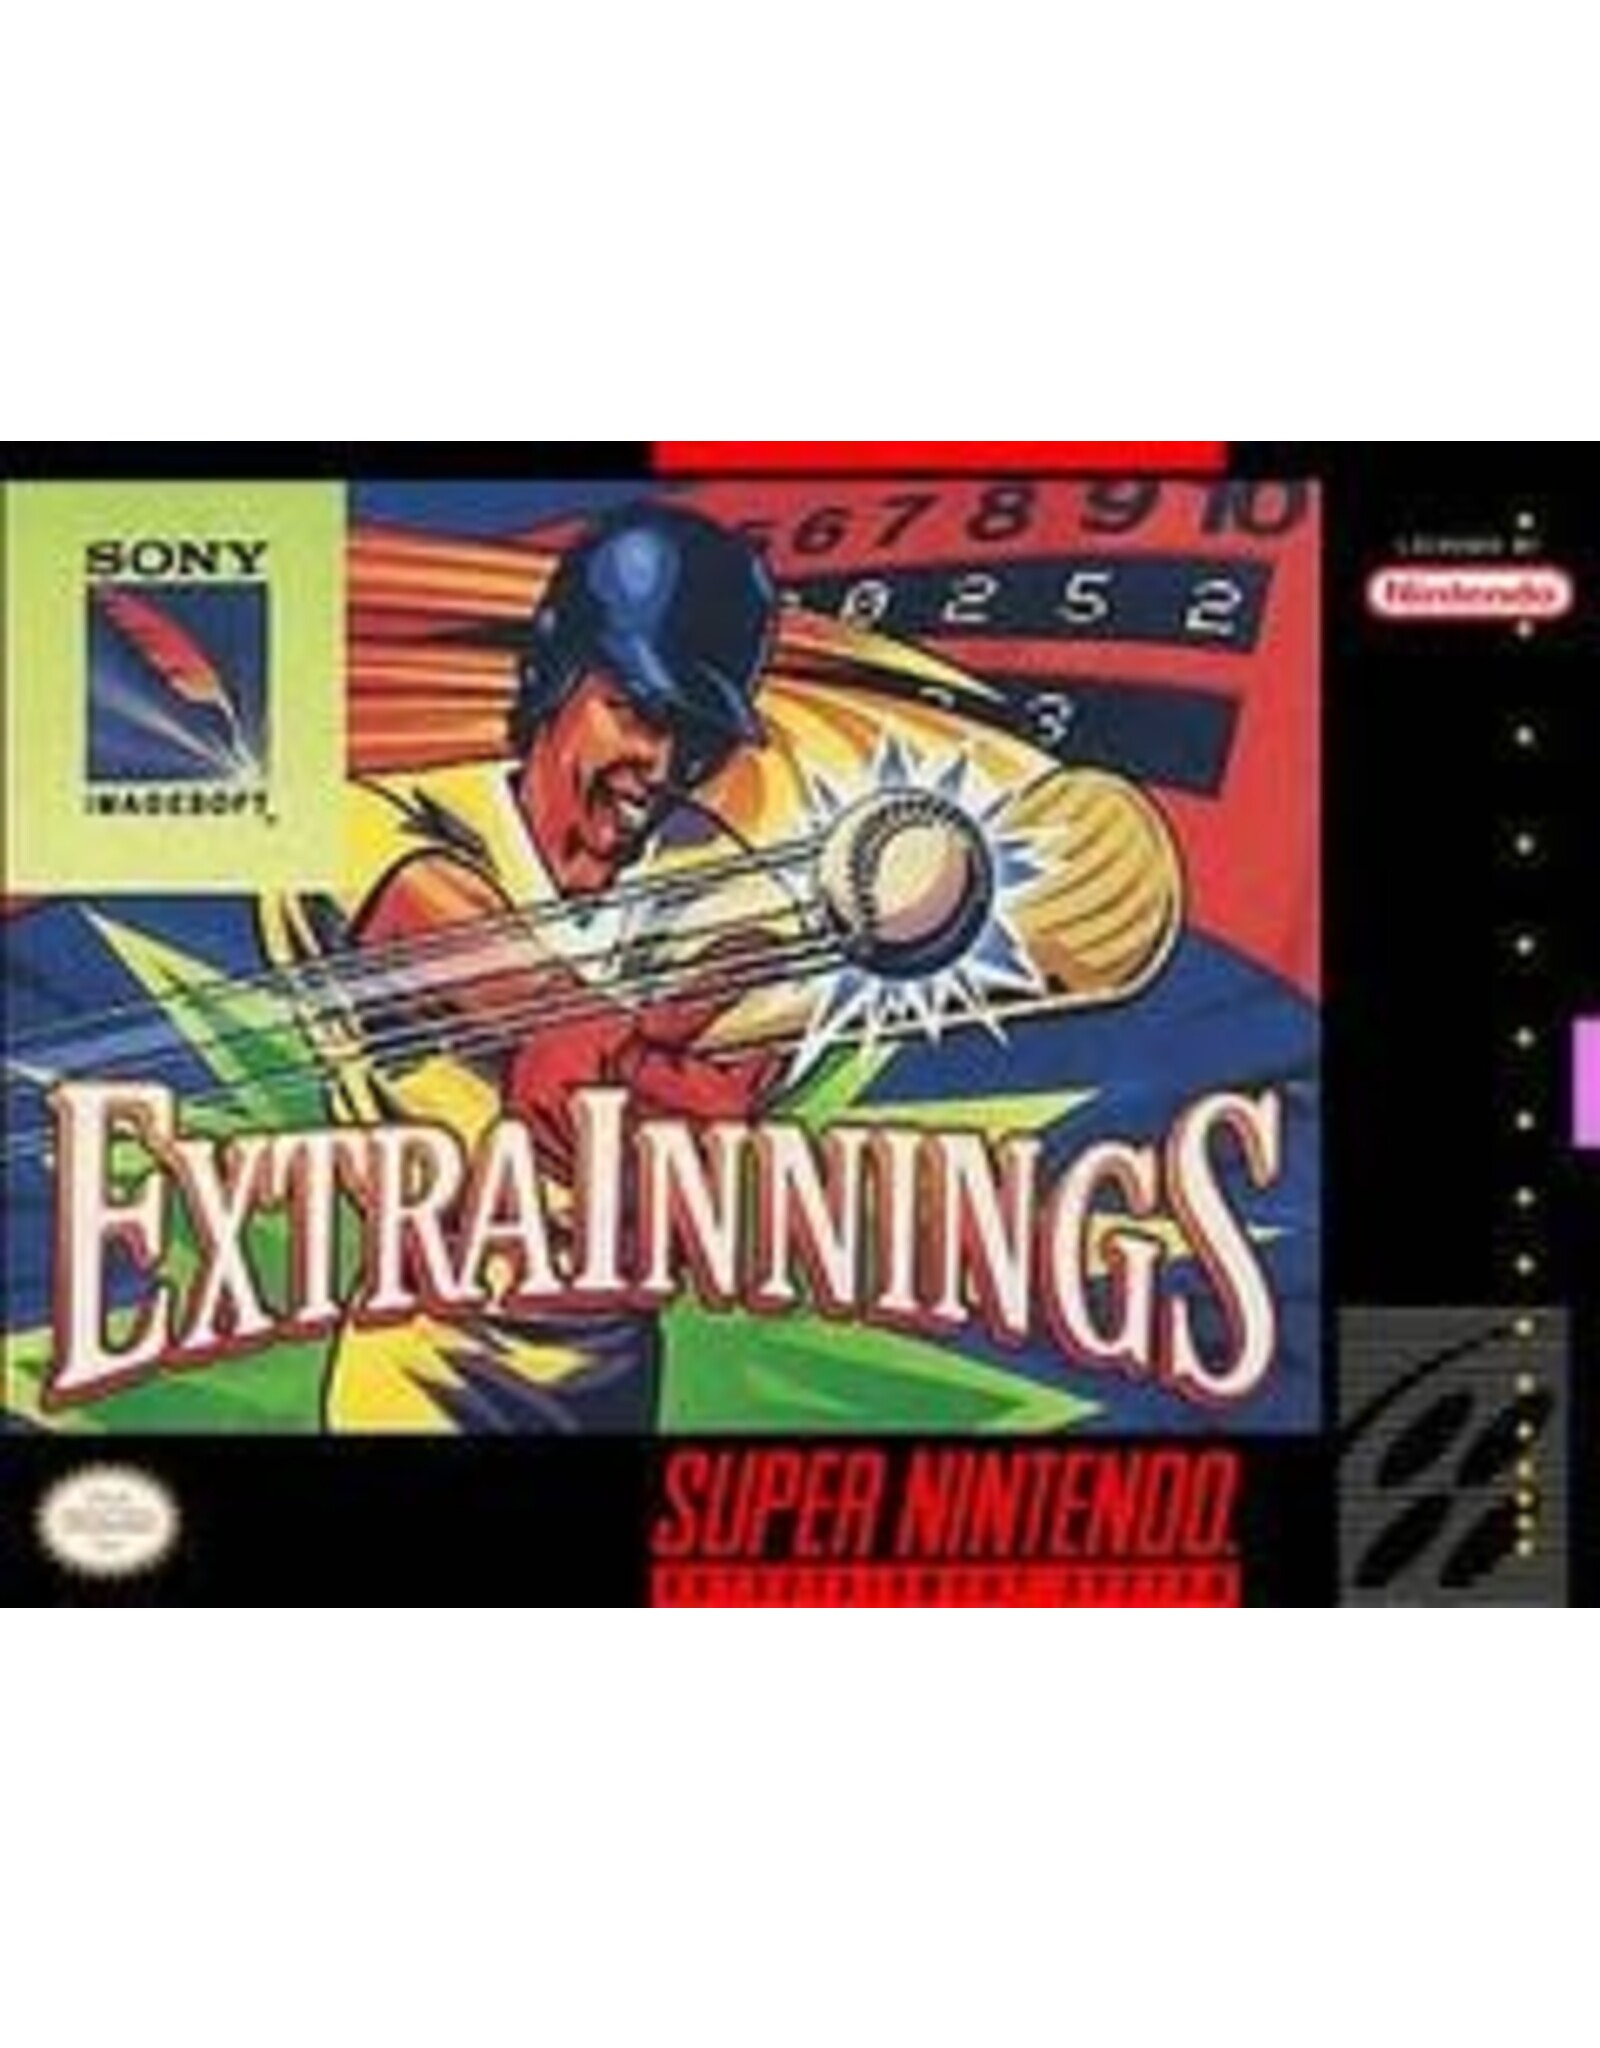 Super Nintendo Extra Innings (Cart Only)